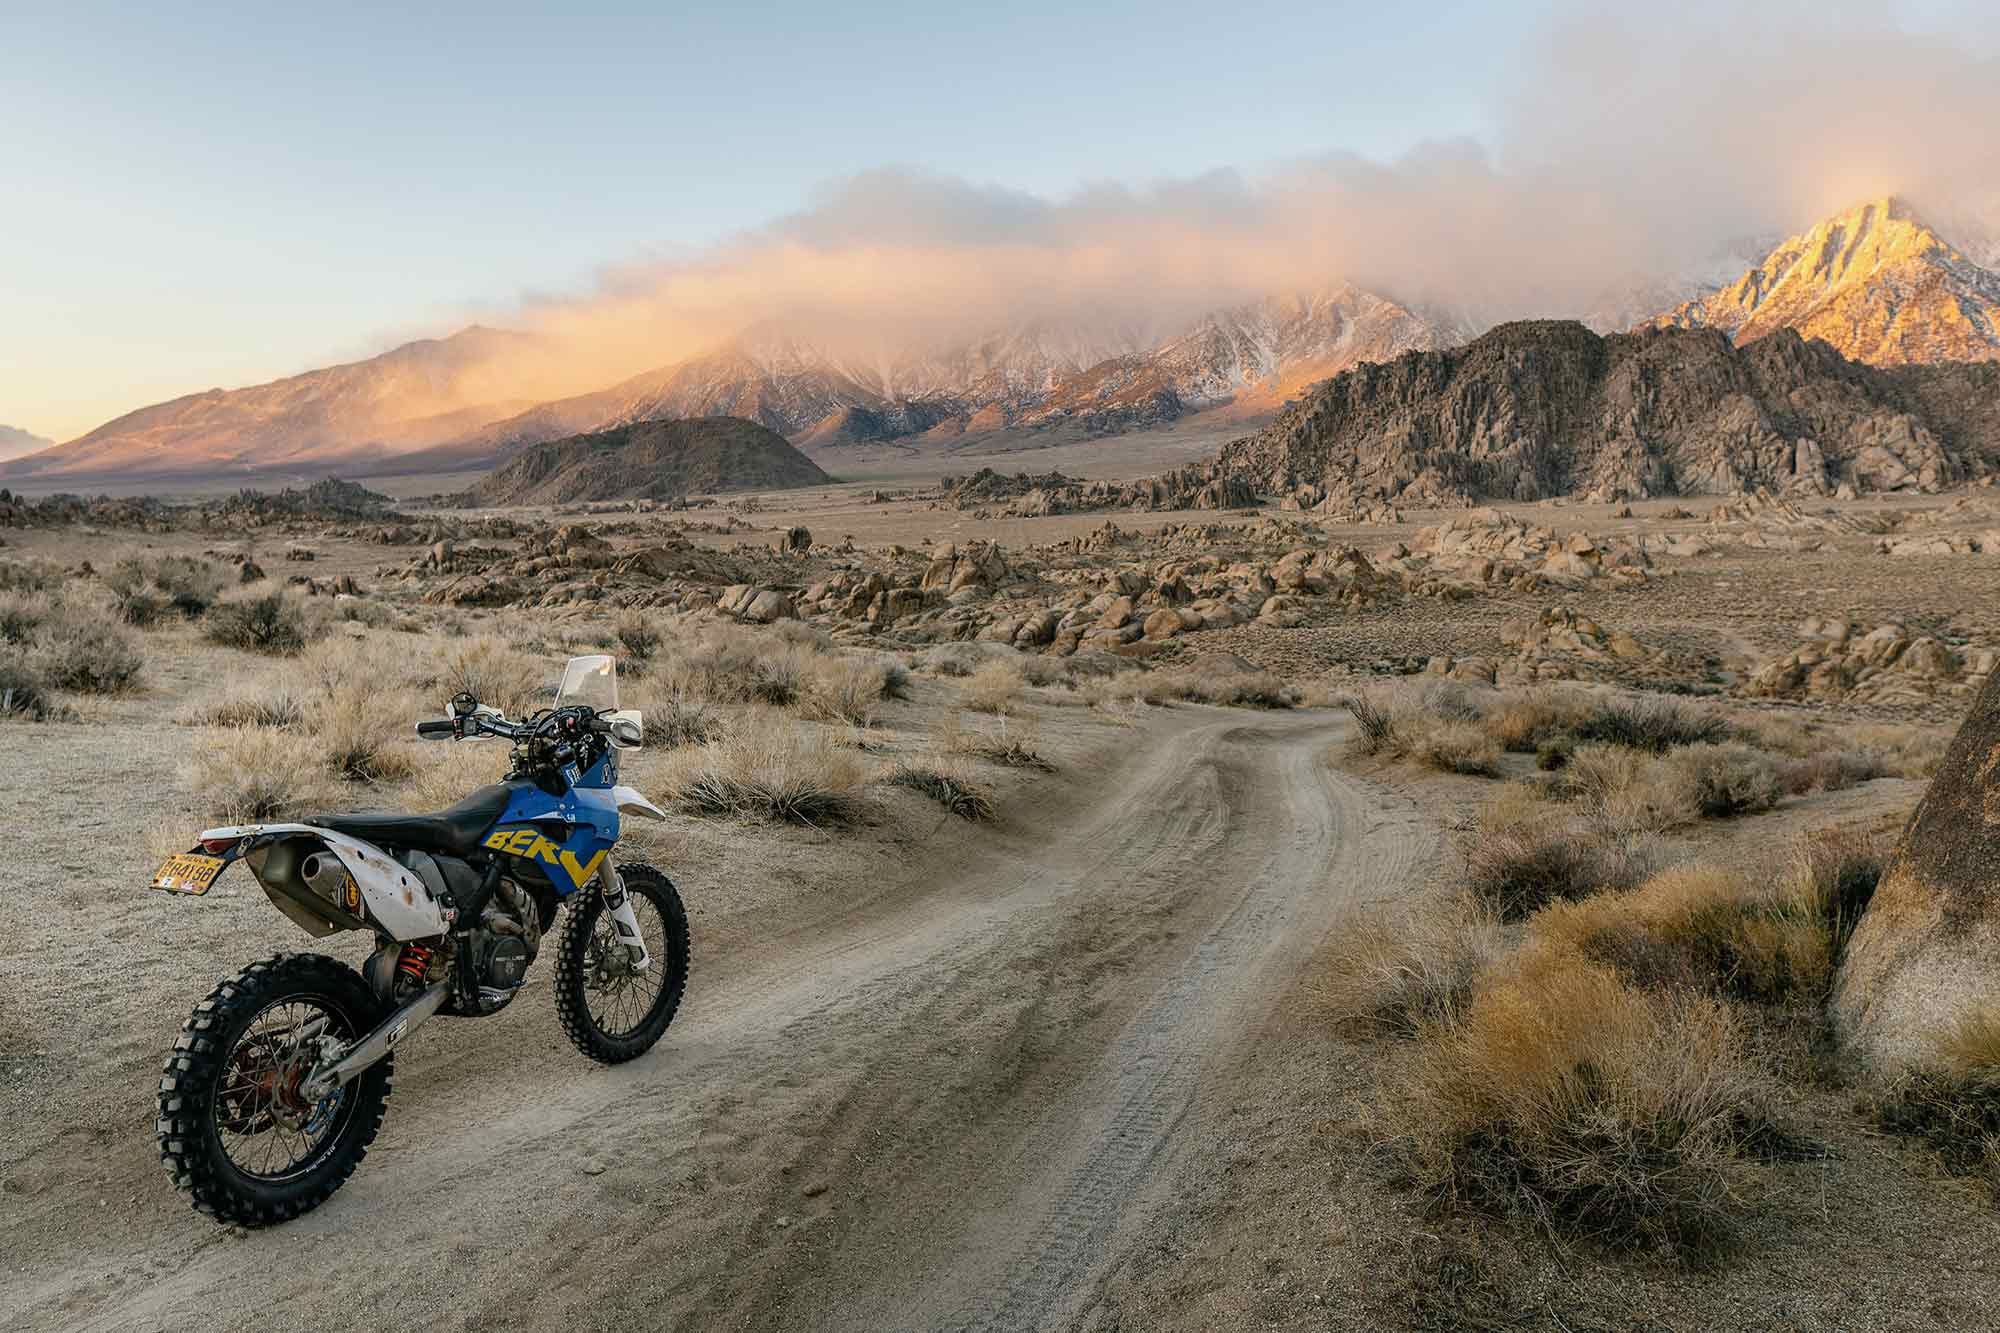 “This does remind me of a guy I know who drinks brake fluid every day. I think he’s addicted but he says he can stop anytime he wants.” —Filmmaker and moto addict Jesse Rosten